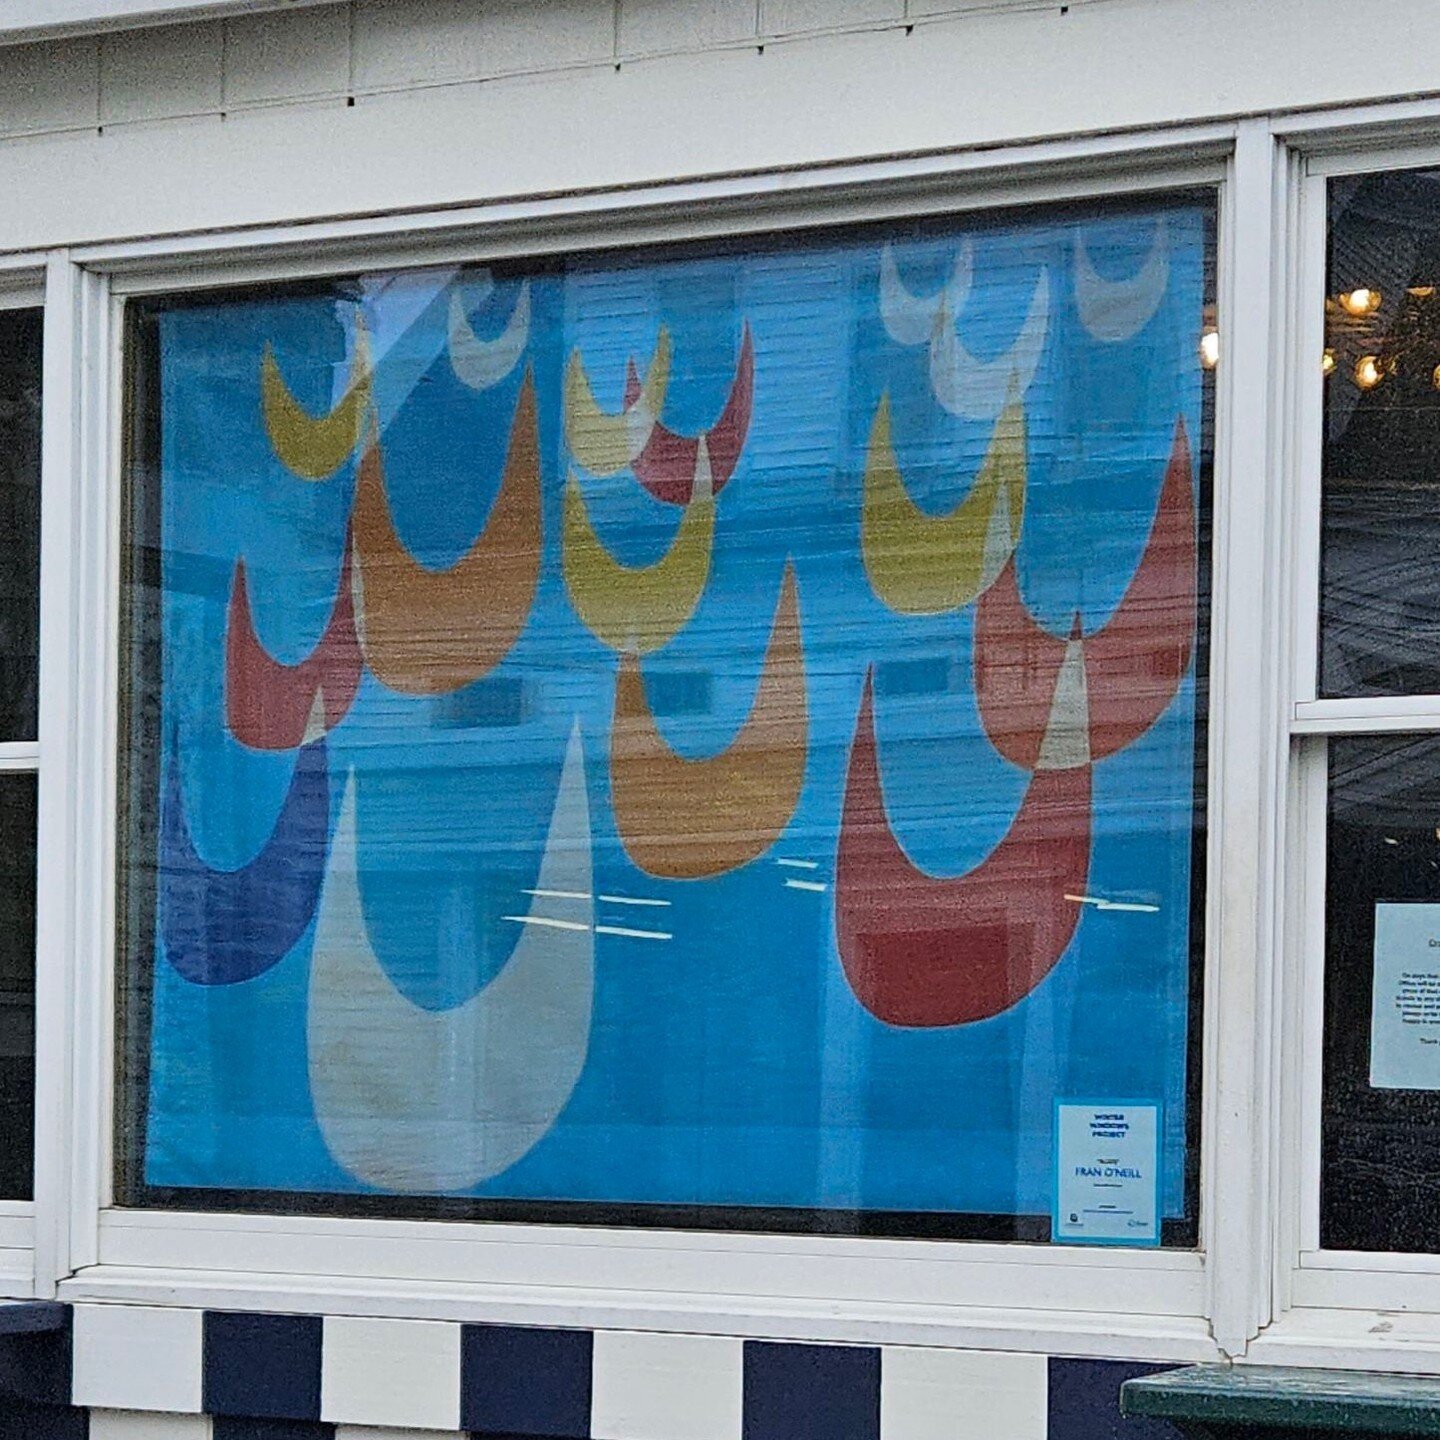 A Big Thank You to @guerrettemarc + his WINTER WINDOWS PROJECT featuring LOCAL ART! Also a big Thank You to THE CROWN + ANCHOR'S JONATHAN HAWKINS + PAOLO MARTINI for sponsoring my artwork! #myptown #myptown🌈 #commonsptown @commonsptown #abstractpain